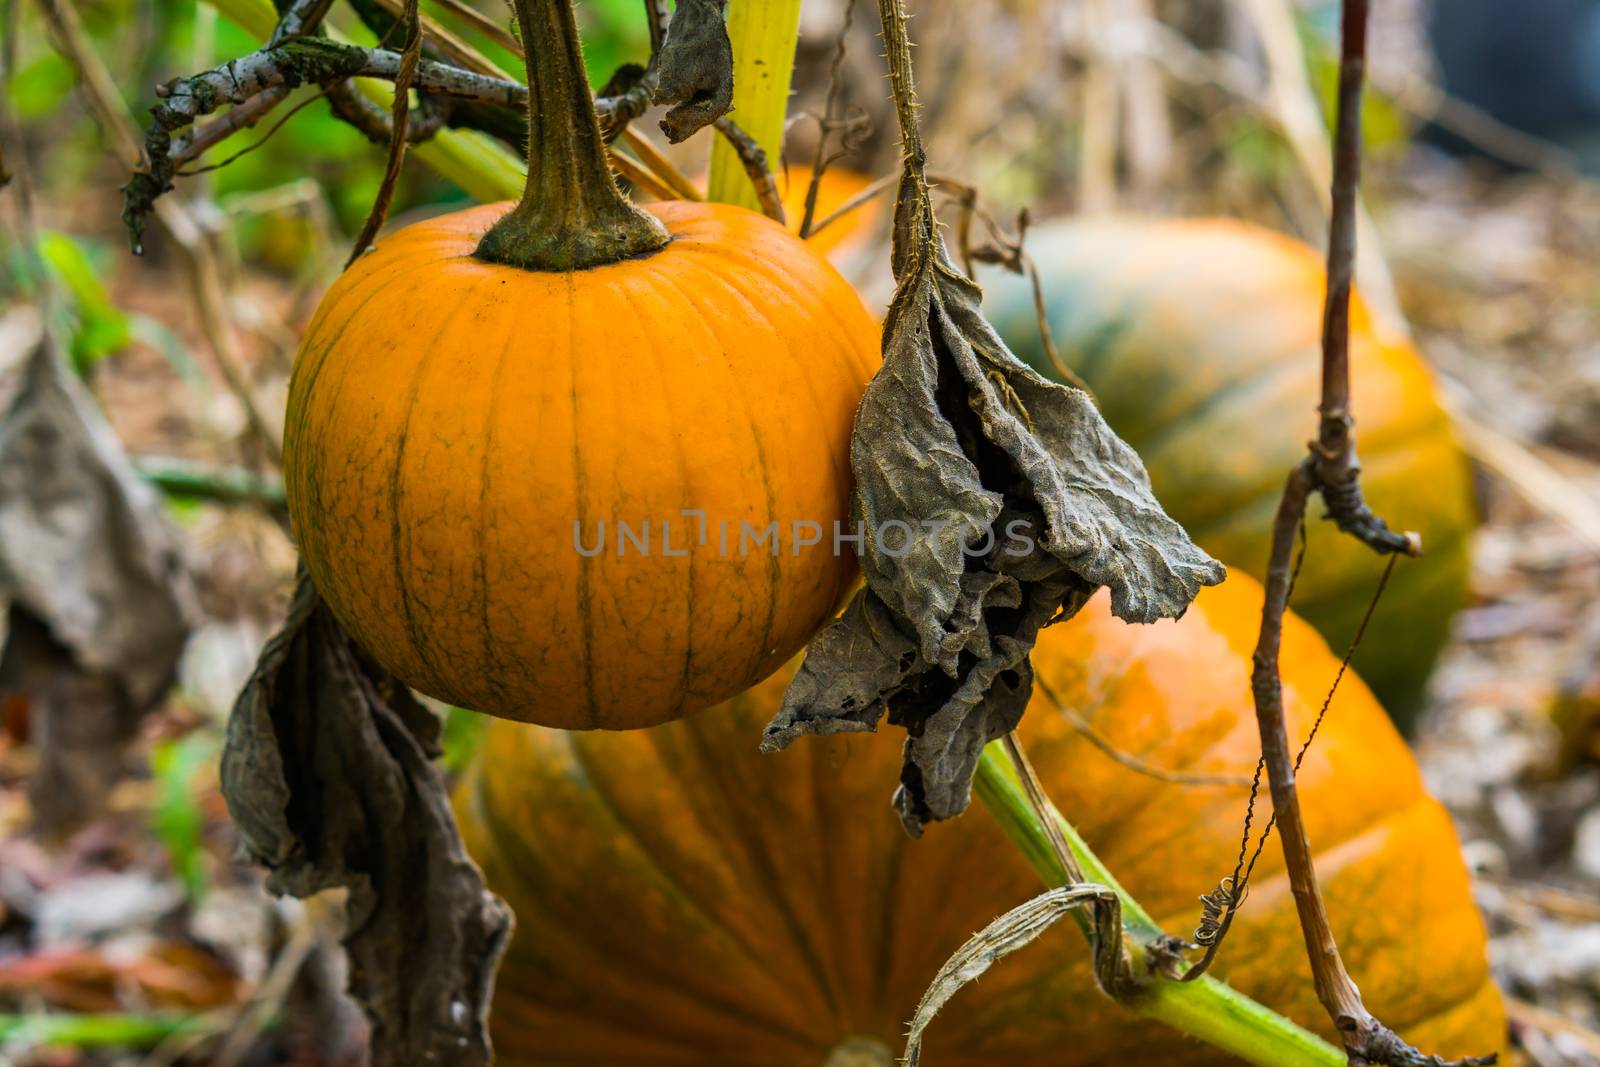 orange pumpkin hanging on the plant with 2 pumpkins in the background organic garden cultivation by charlottebleijenberg